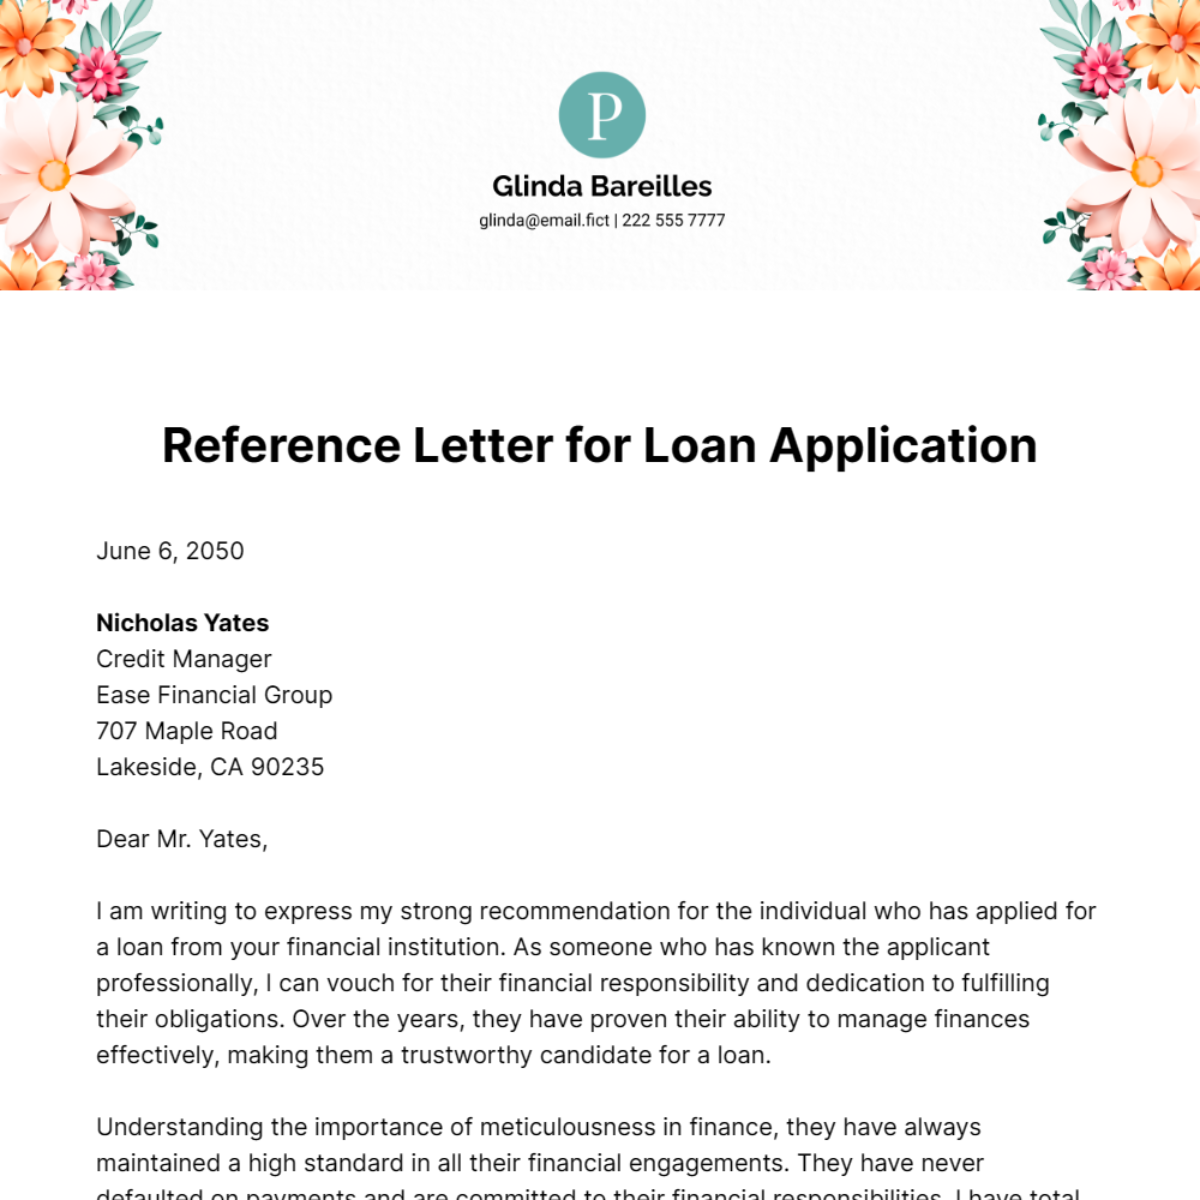 Reference Letter for Loan Application Template